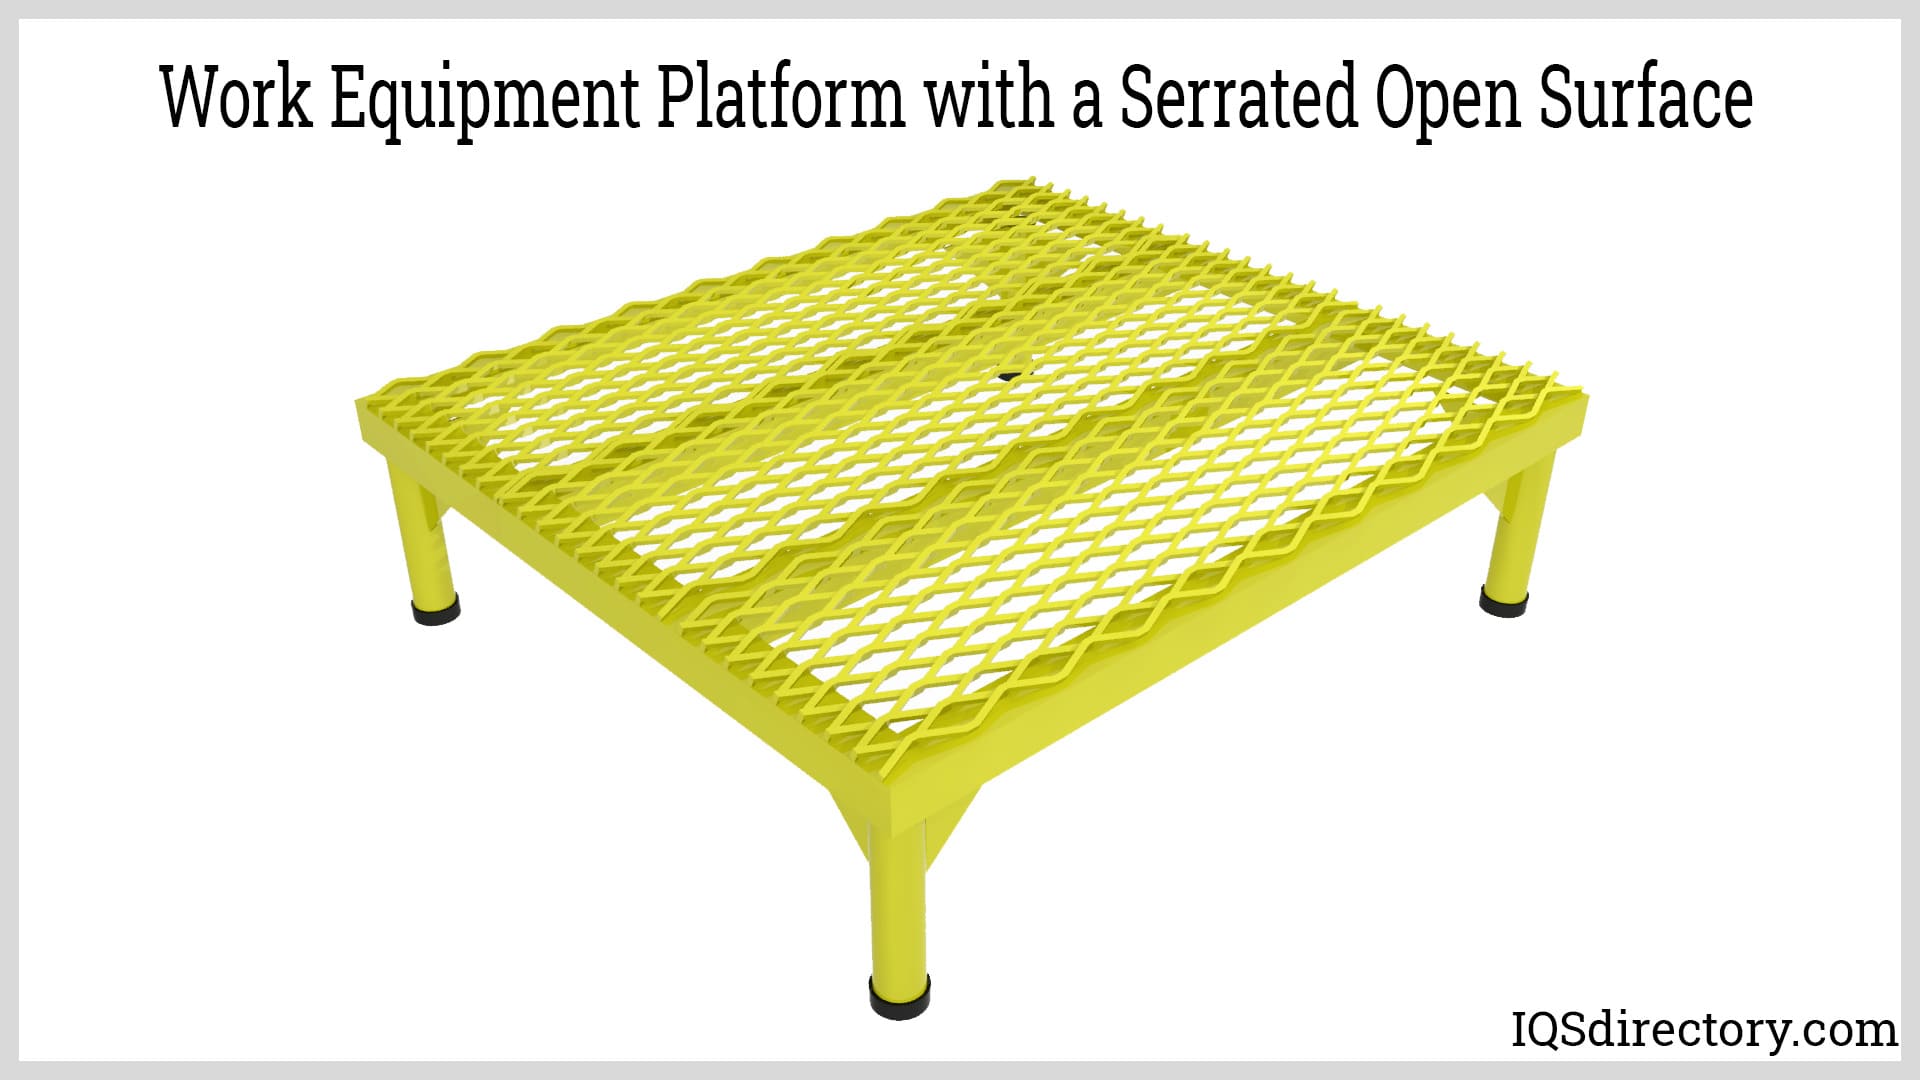 Work Equipment Platform with a Serrated Open Surface